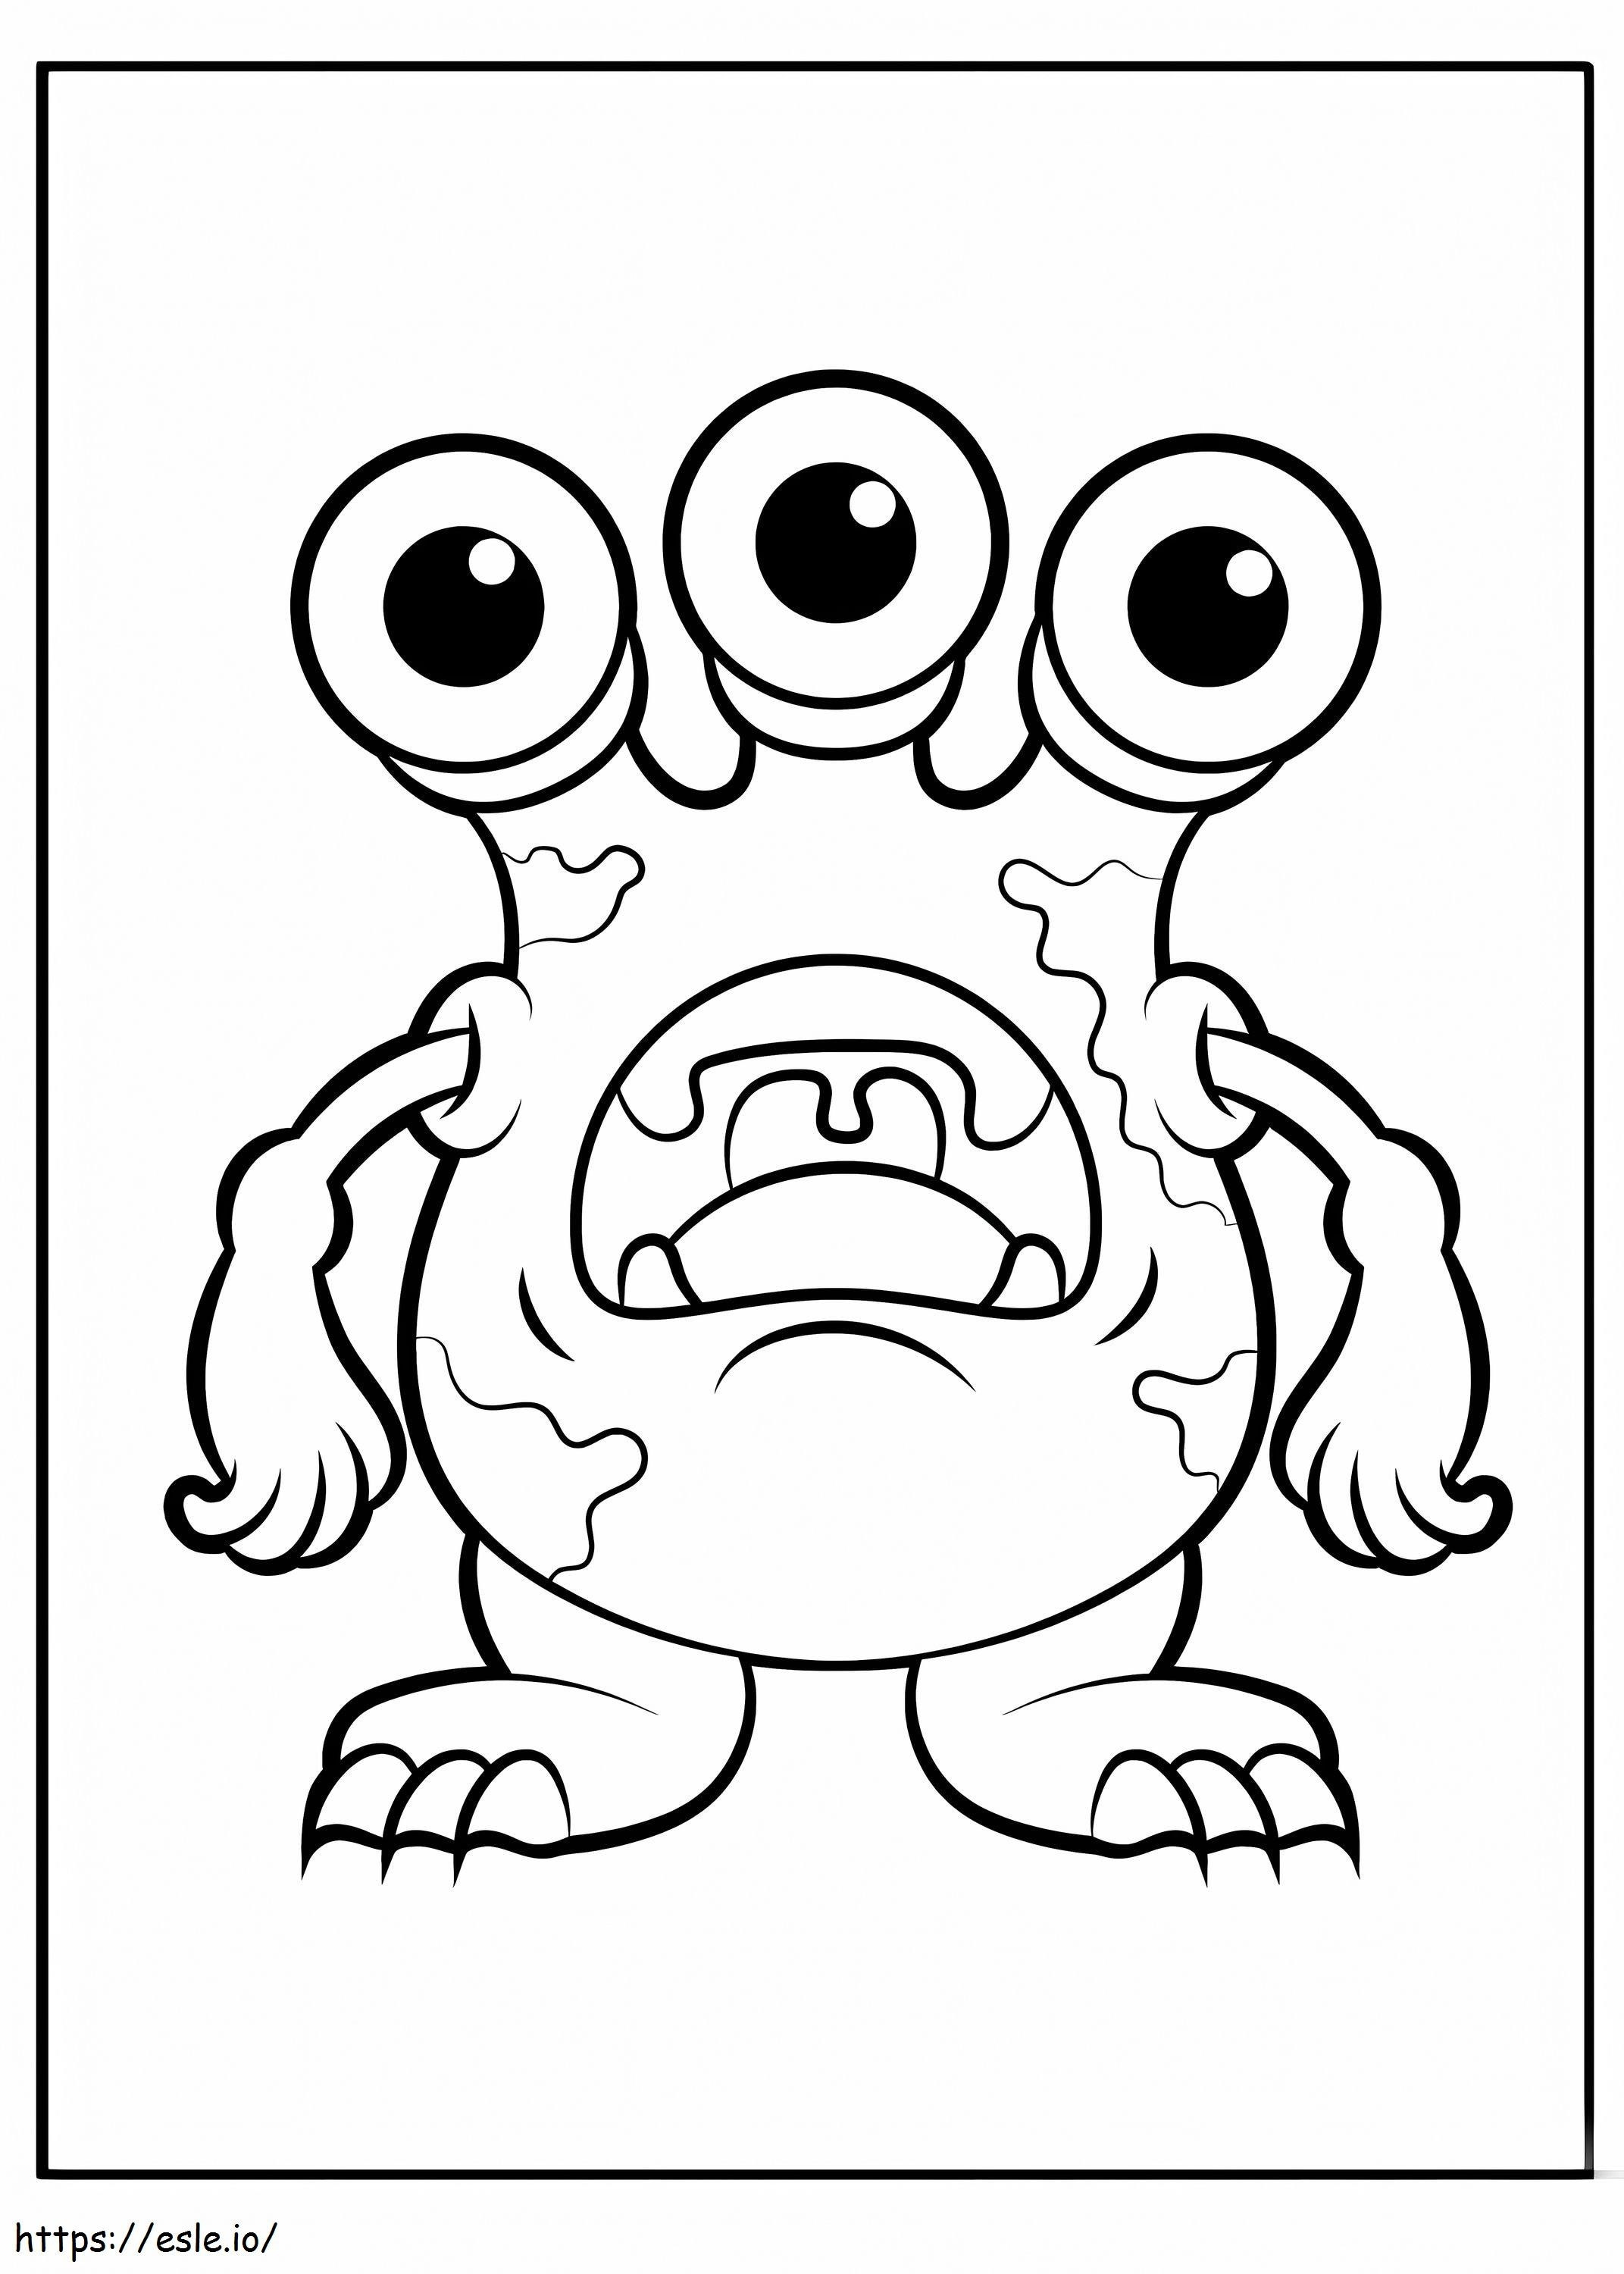 Basic Monster coloring page